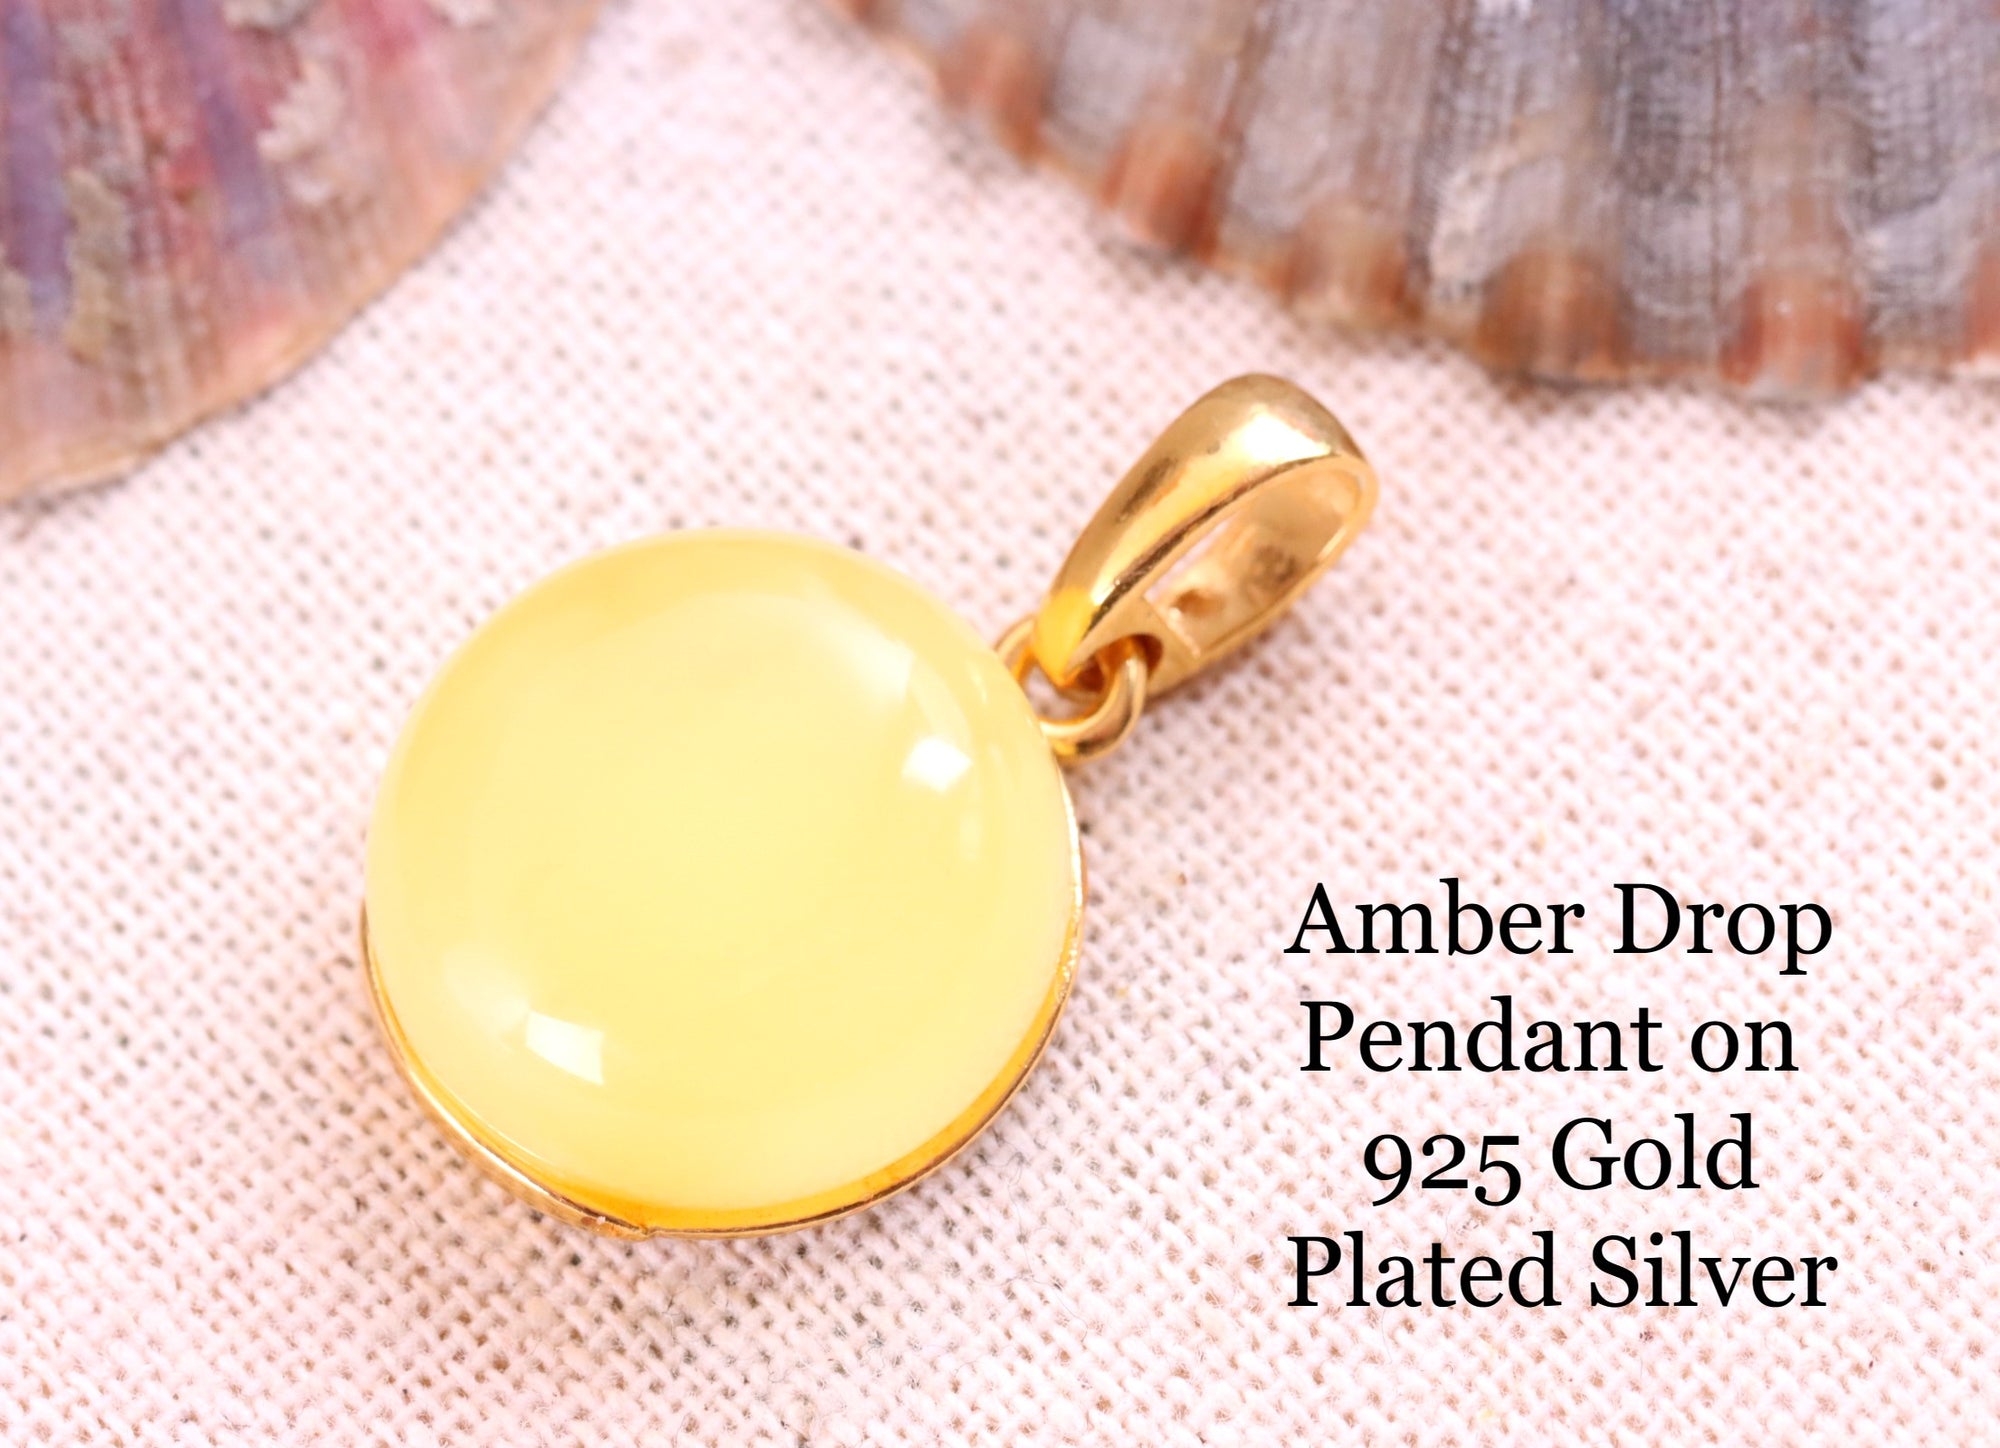 New ! White Amber Drop Pendant on 925 Gold Plated Silver